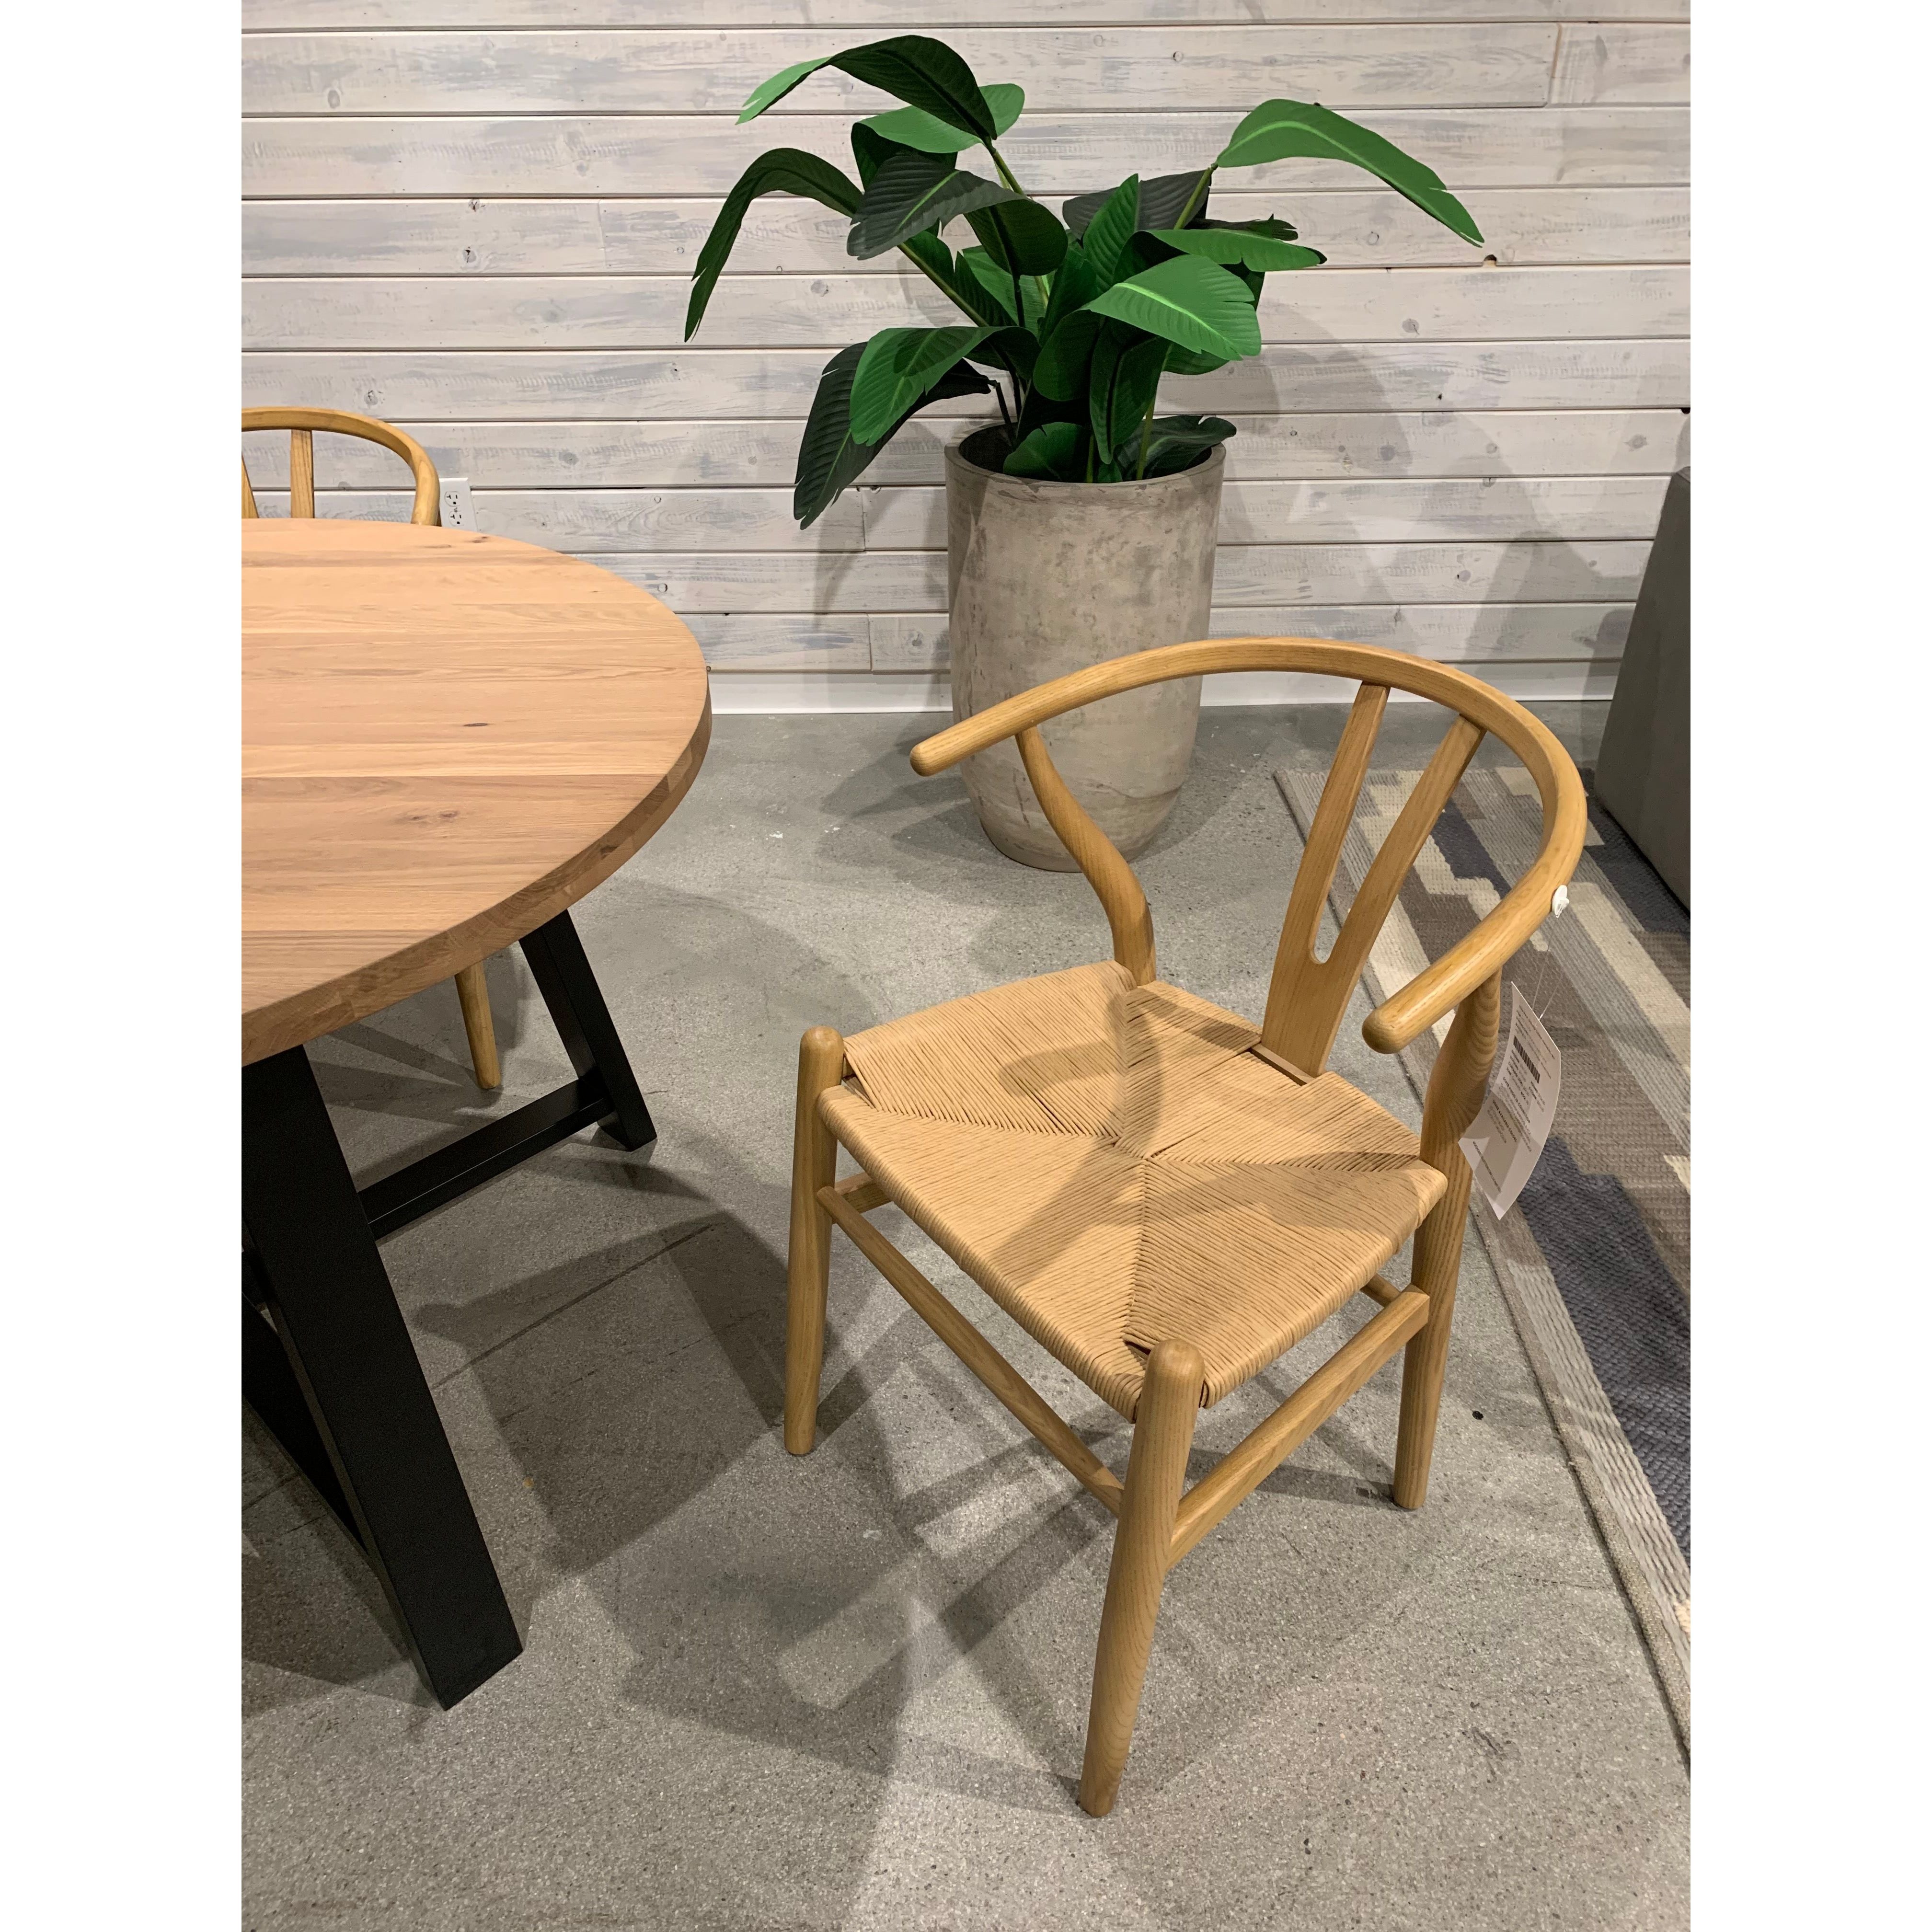 We loved the curved back and woven fibre seat of this this Ventana Black Dining Chair. Simple and sturdy, this is an easy choice for your dining room.   Size: 19.5"W x 16.5"D x 31"H